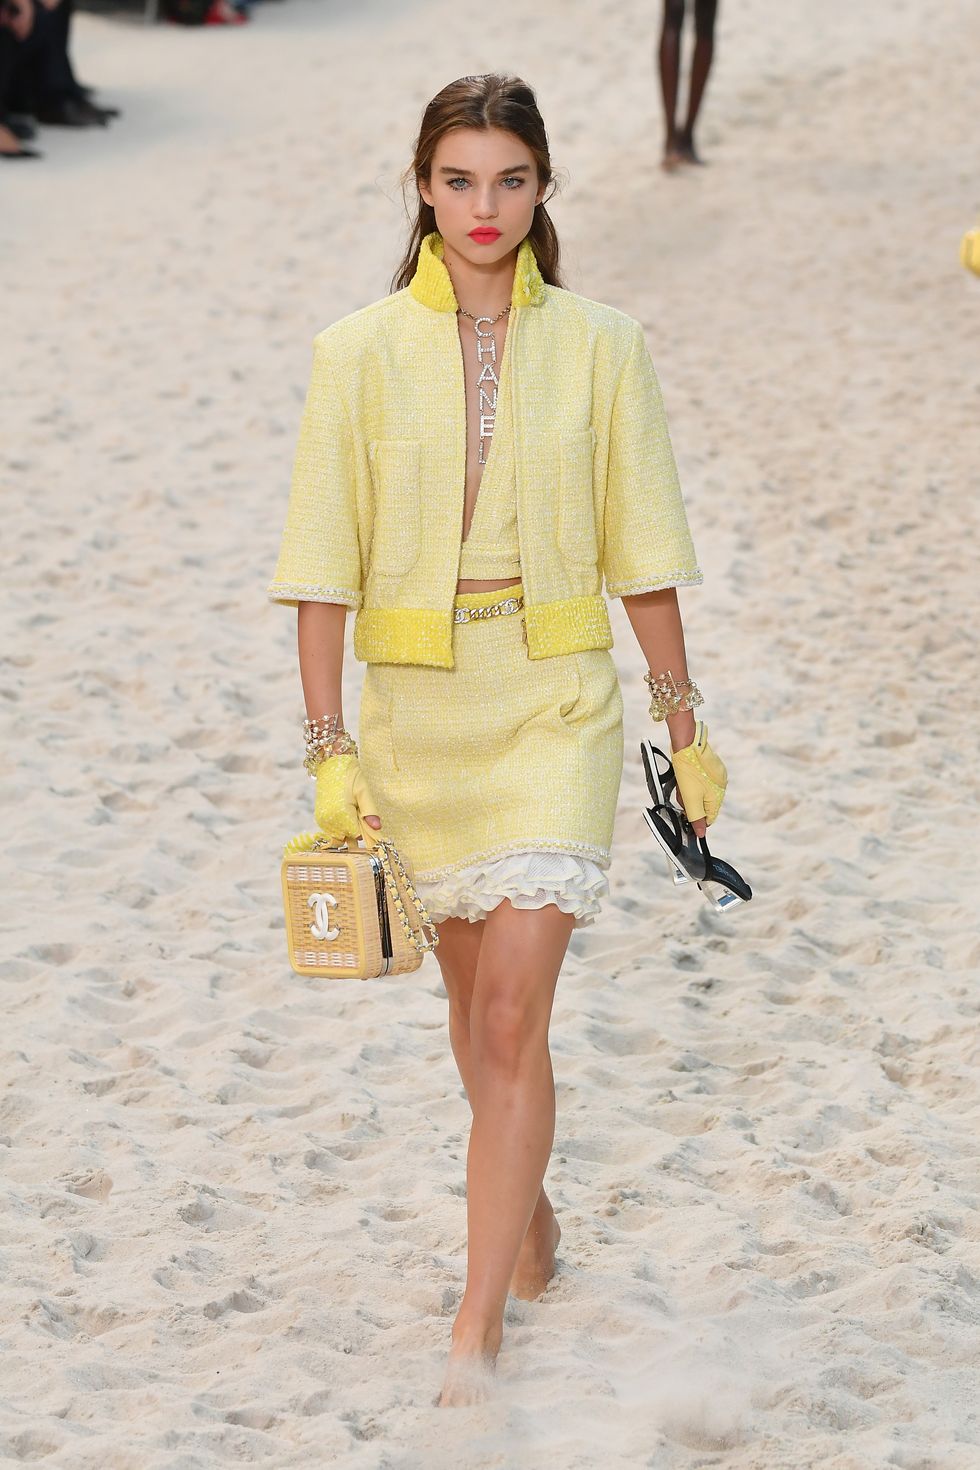 Chanel's Spring 2019 Runway Was a Beach With an Ocean and Lifeguard On Duty